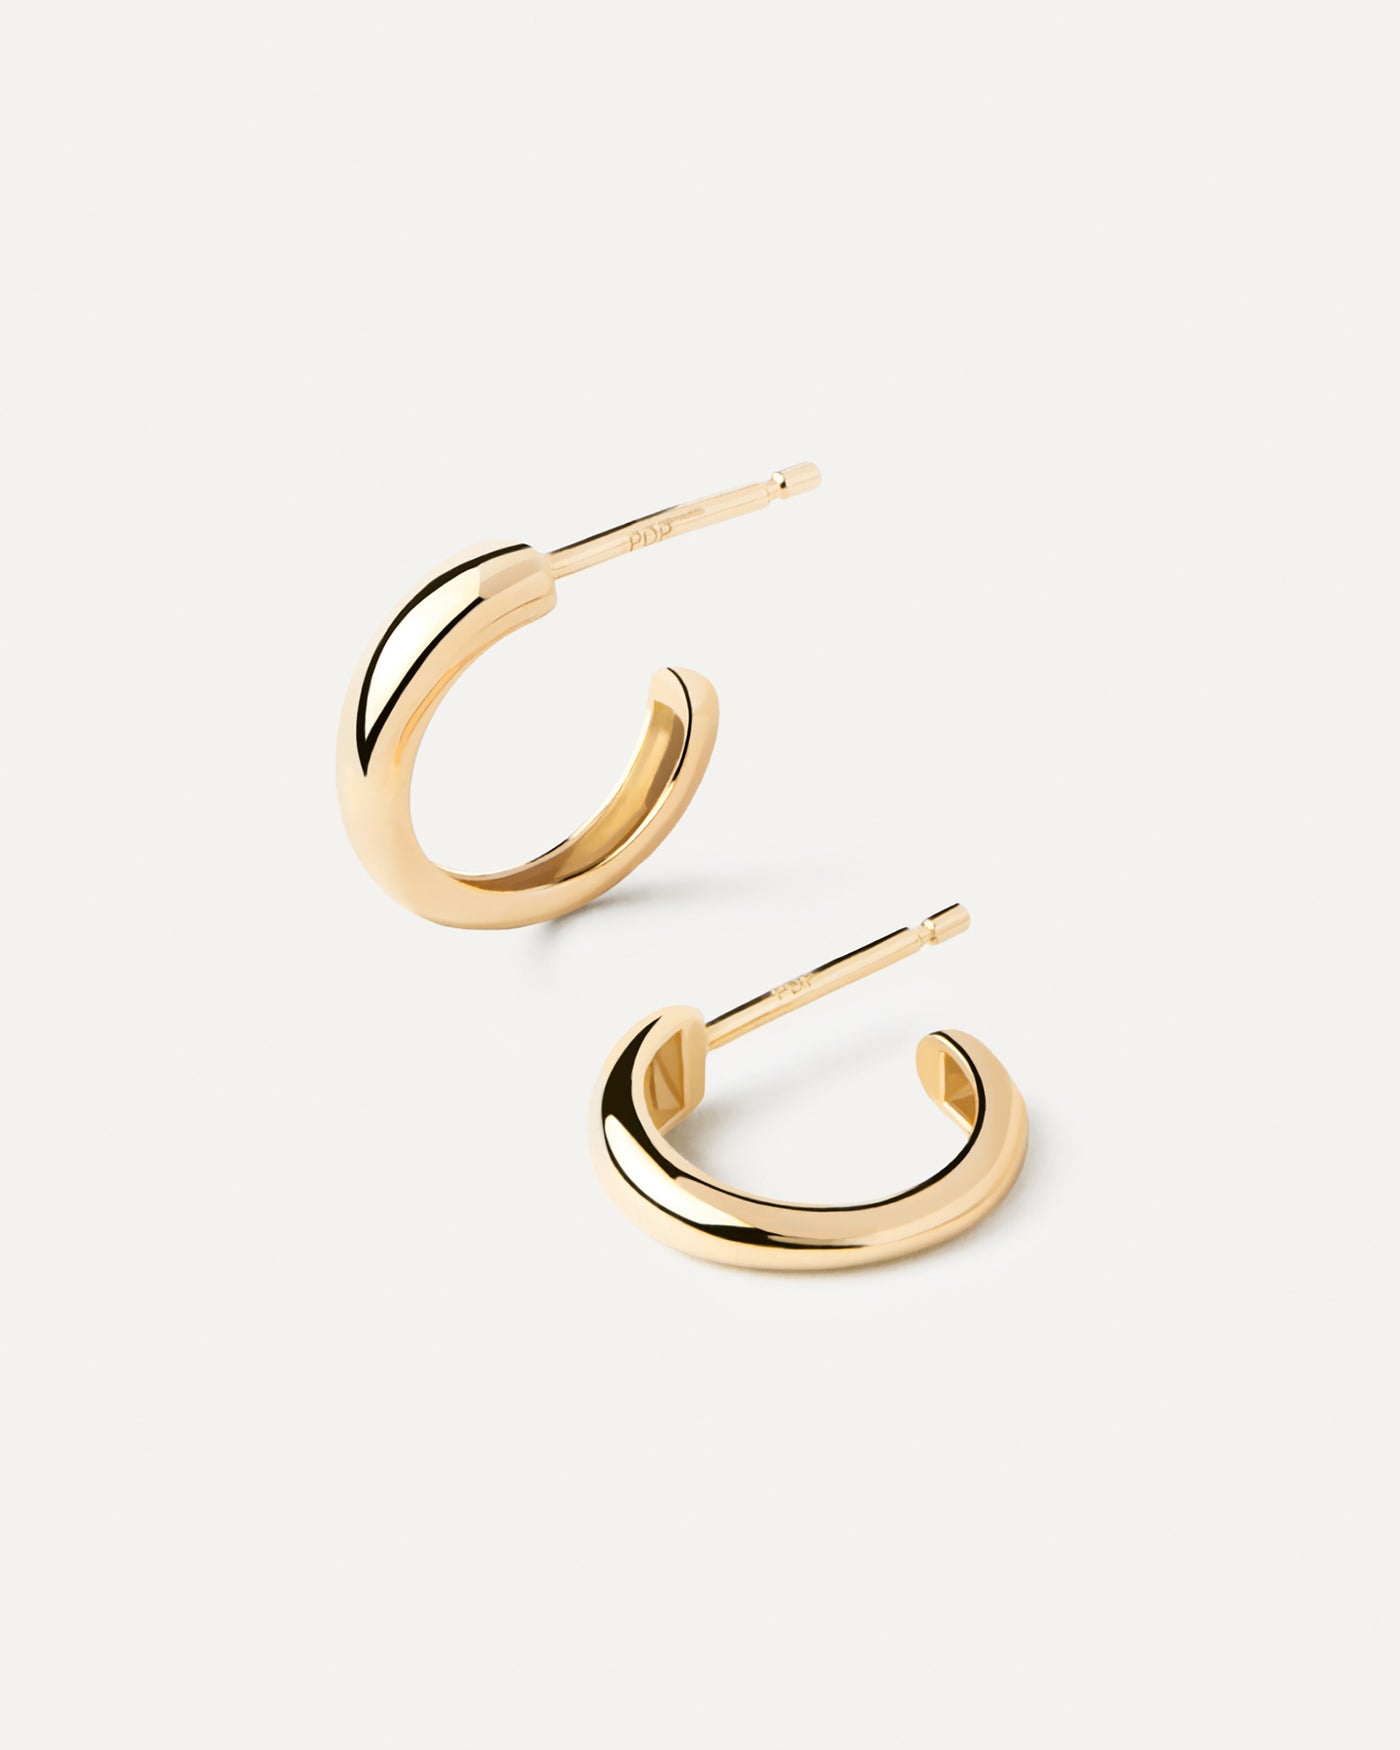 2023 Selection | Gold Joan Mini Hoops. Small hoop earrings in solid 18K yellow gold with rounded edges. Get the latest arrival from PDPAOLA. Place your order safely and get this Best Seller. Free Shipping.